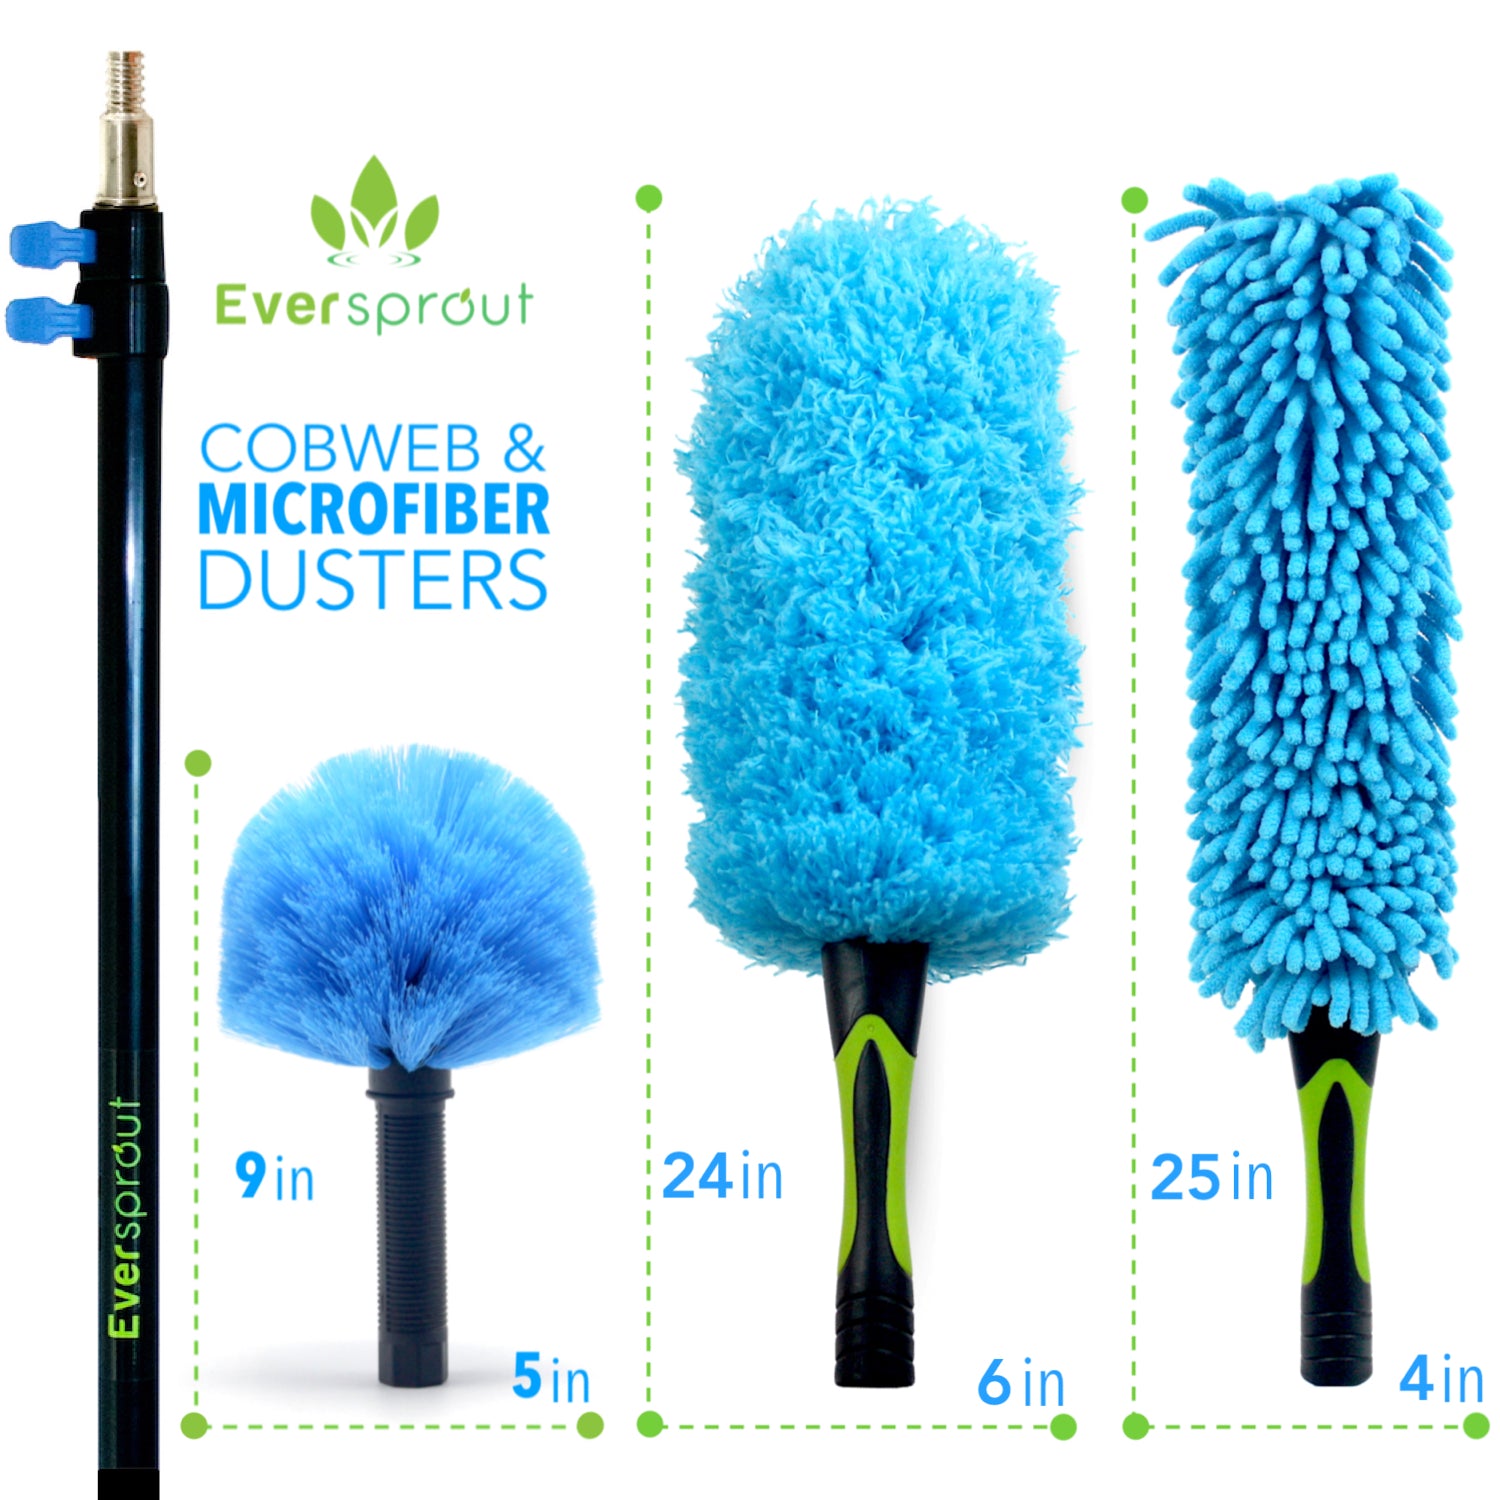 EVERSPROUT 7-to-26 Foot Extension Pole Total Kit 30 Nepal